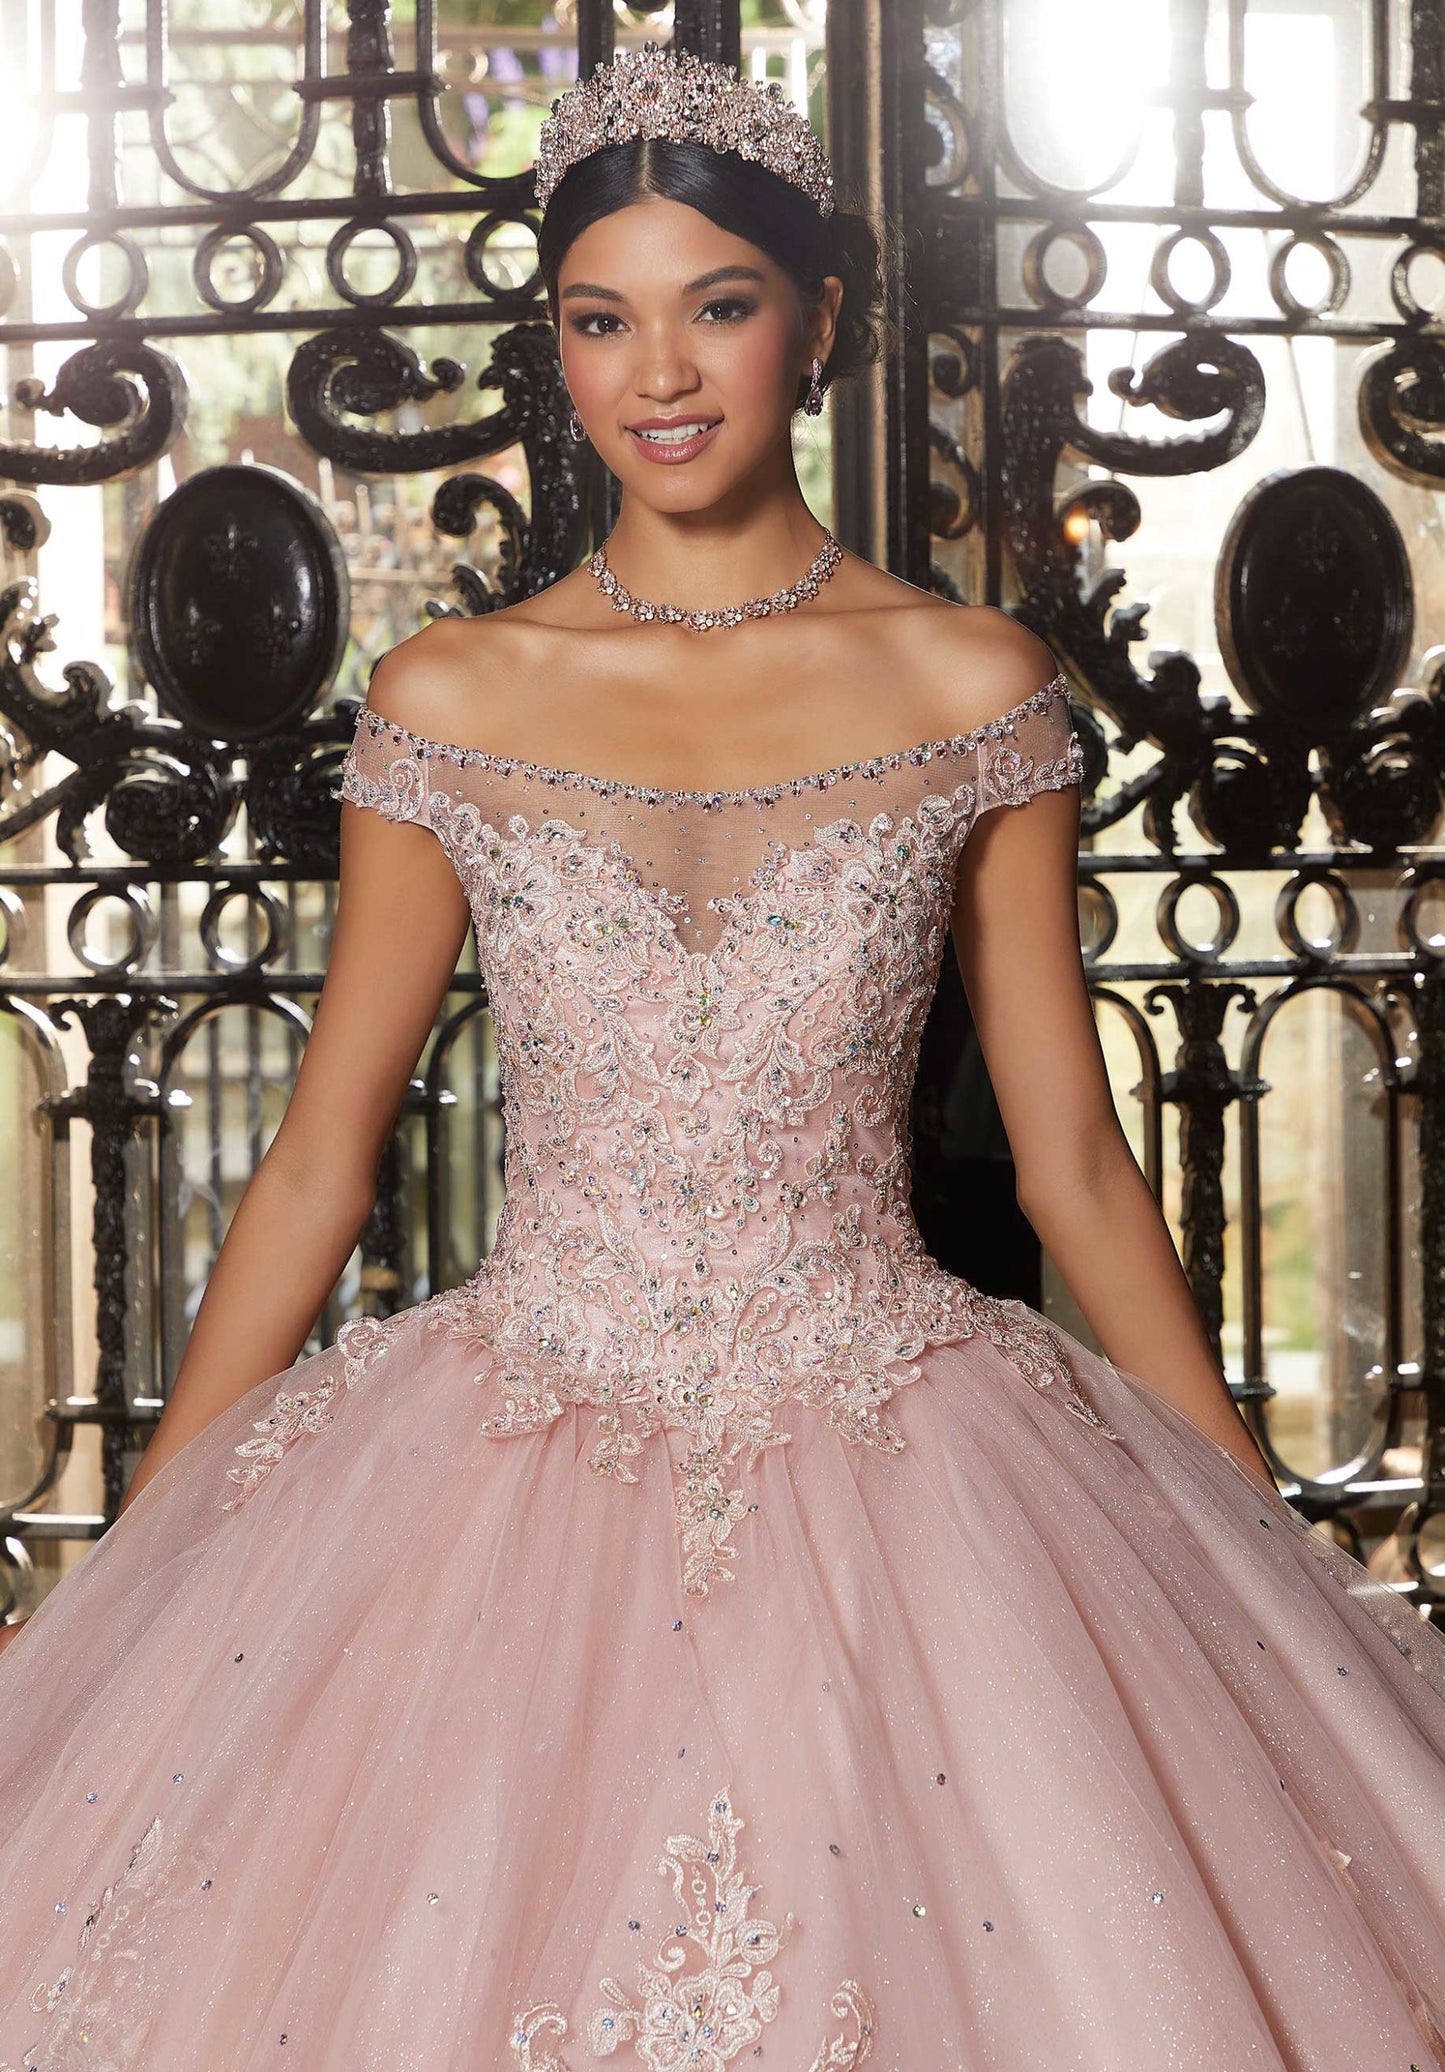 Sparkle Net Quinceañera Dress with Jeweled Edging #89340